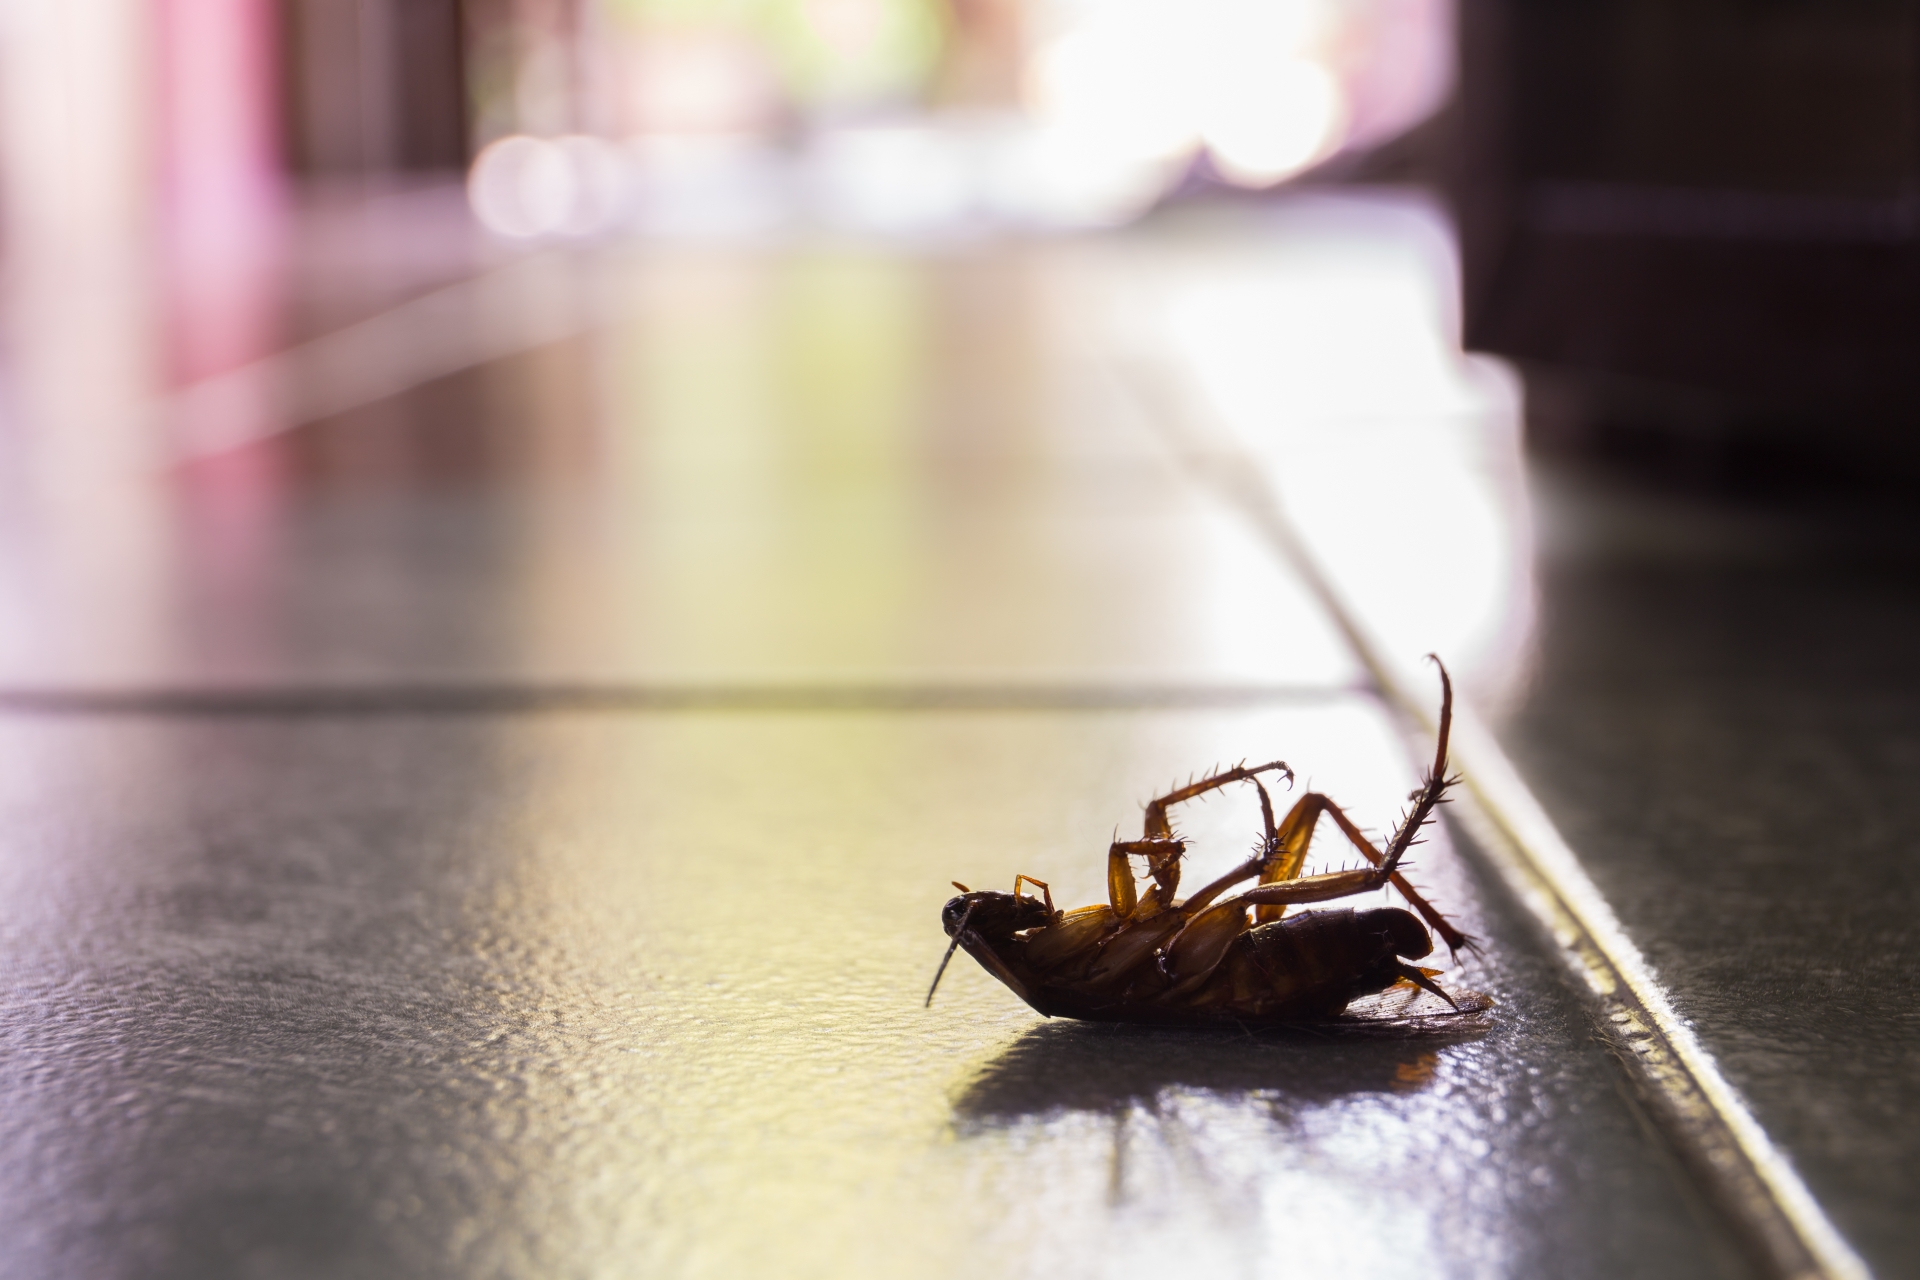 Cockroach Control, Pest Control in Greenford, UB6. Call Now 020 8166 9746